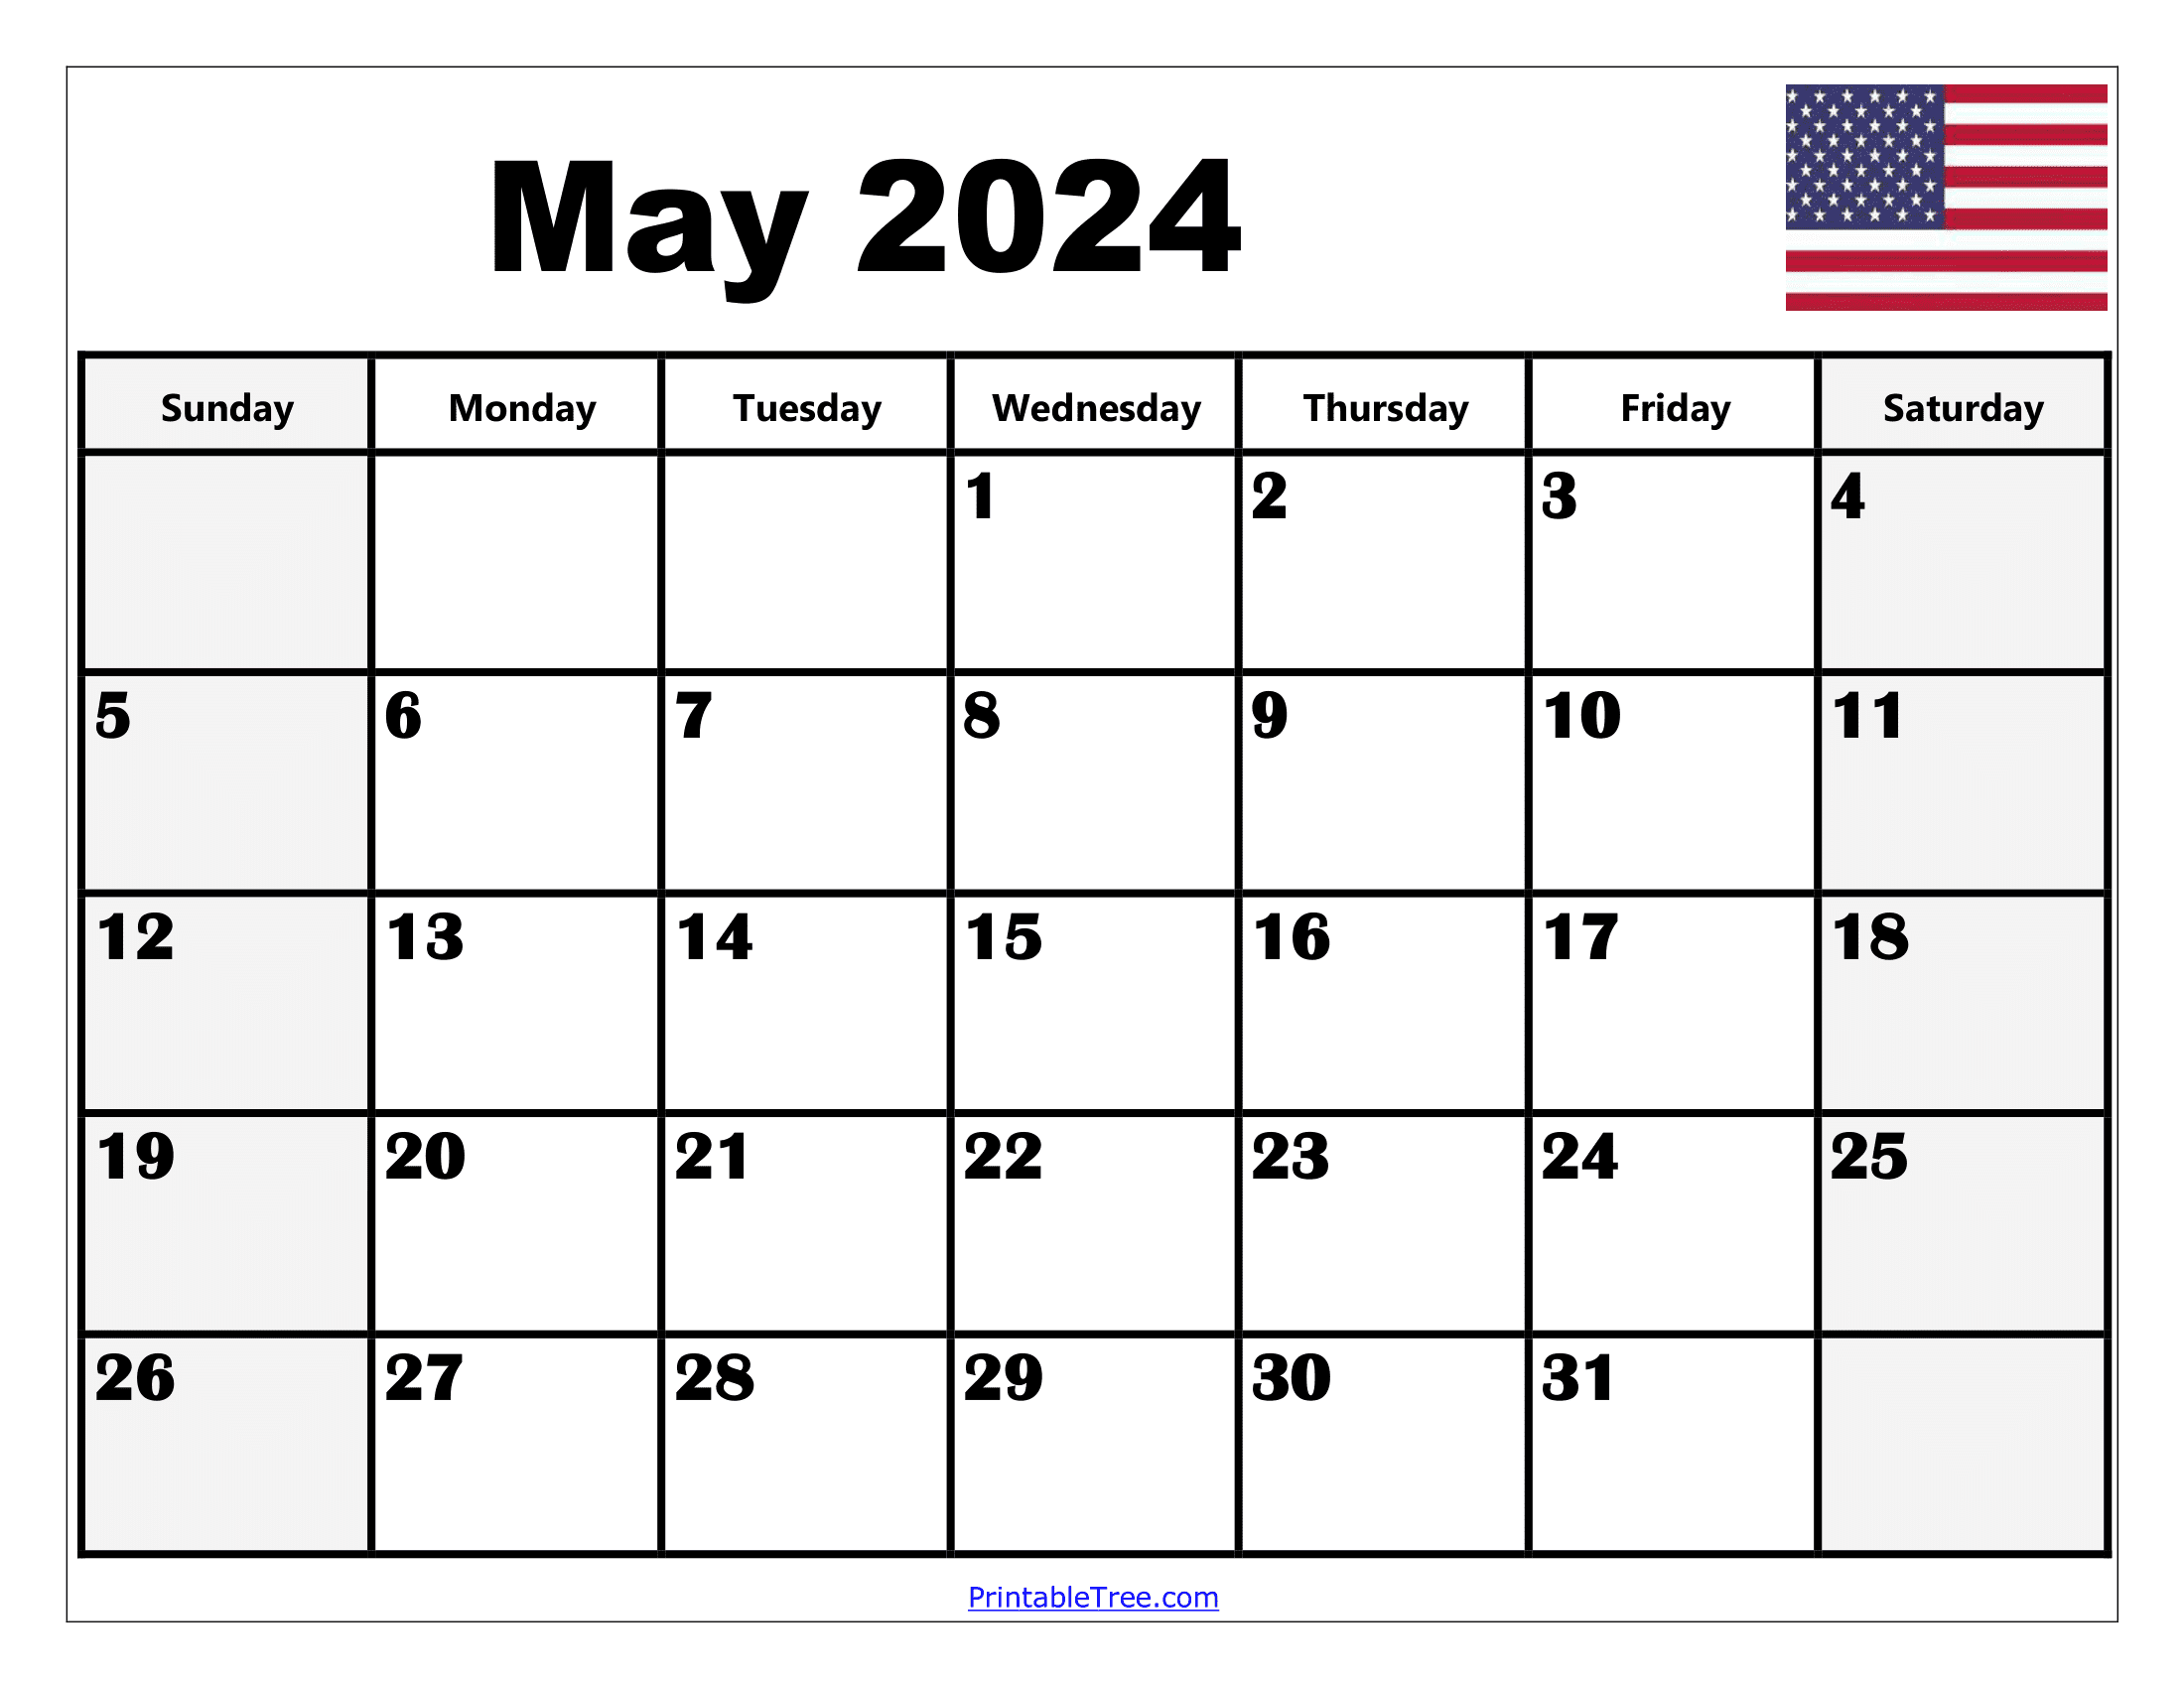 Blank May 2024 Calendar Printable Pdf Templates With Holidays for Month Of May 2024 Printable Calendar